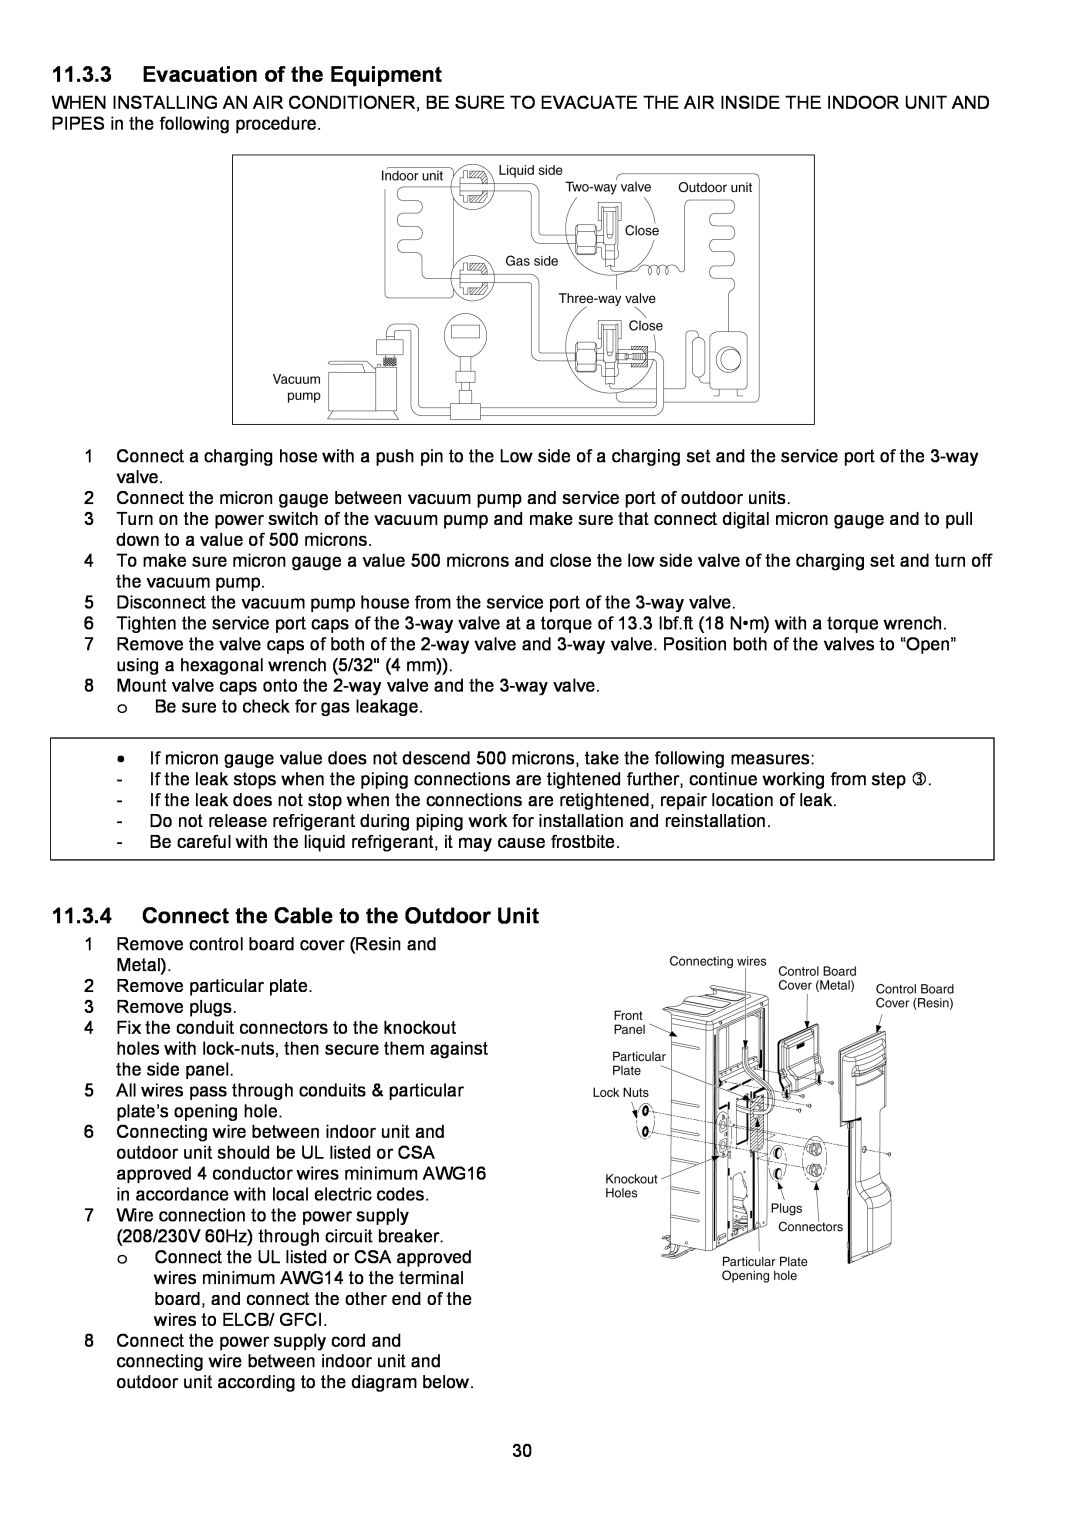 Panasonic CU-XE9PKUA, CS-XE12PKUA manual 11.3.3Evacuation of the Equipment, 11.3.4Connect the Cable to the Outdoor Unit 